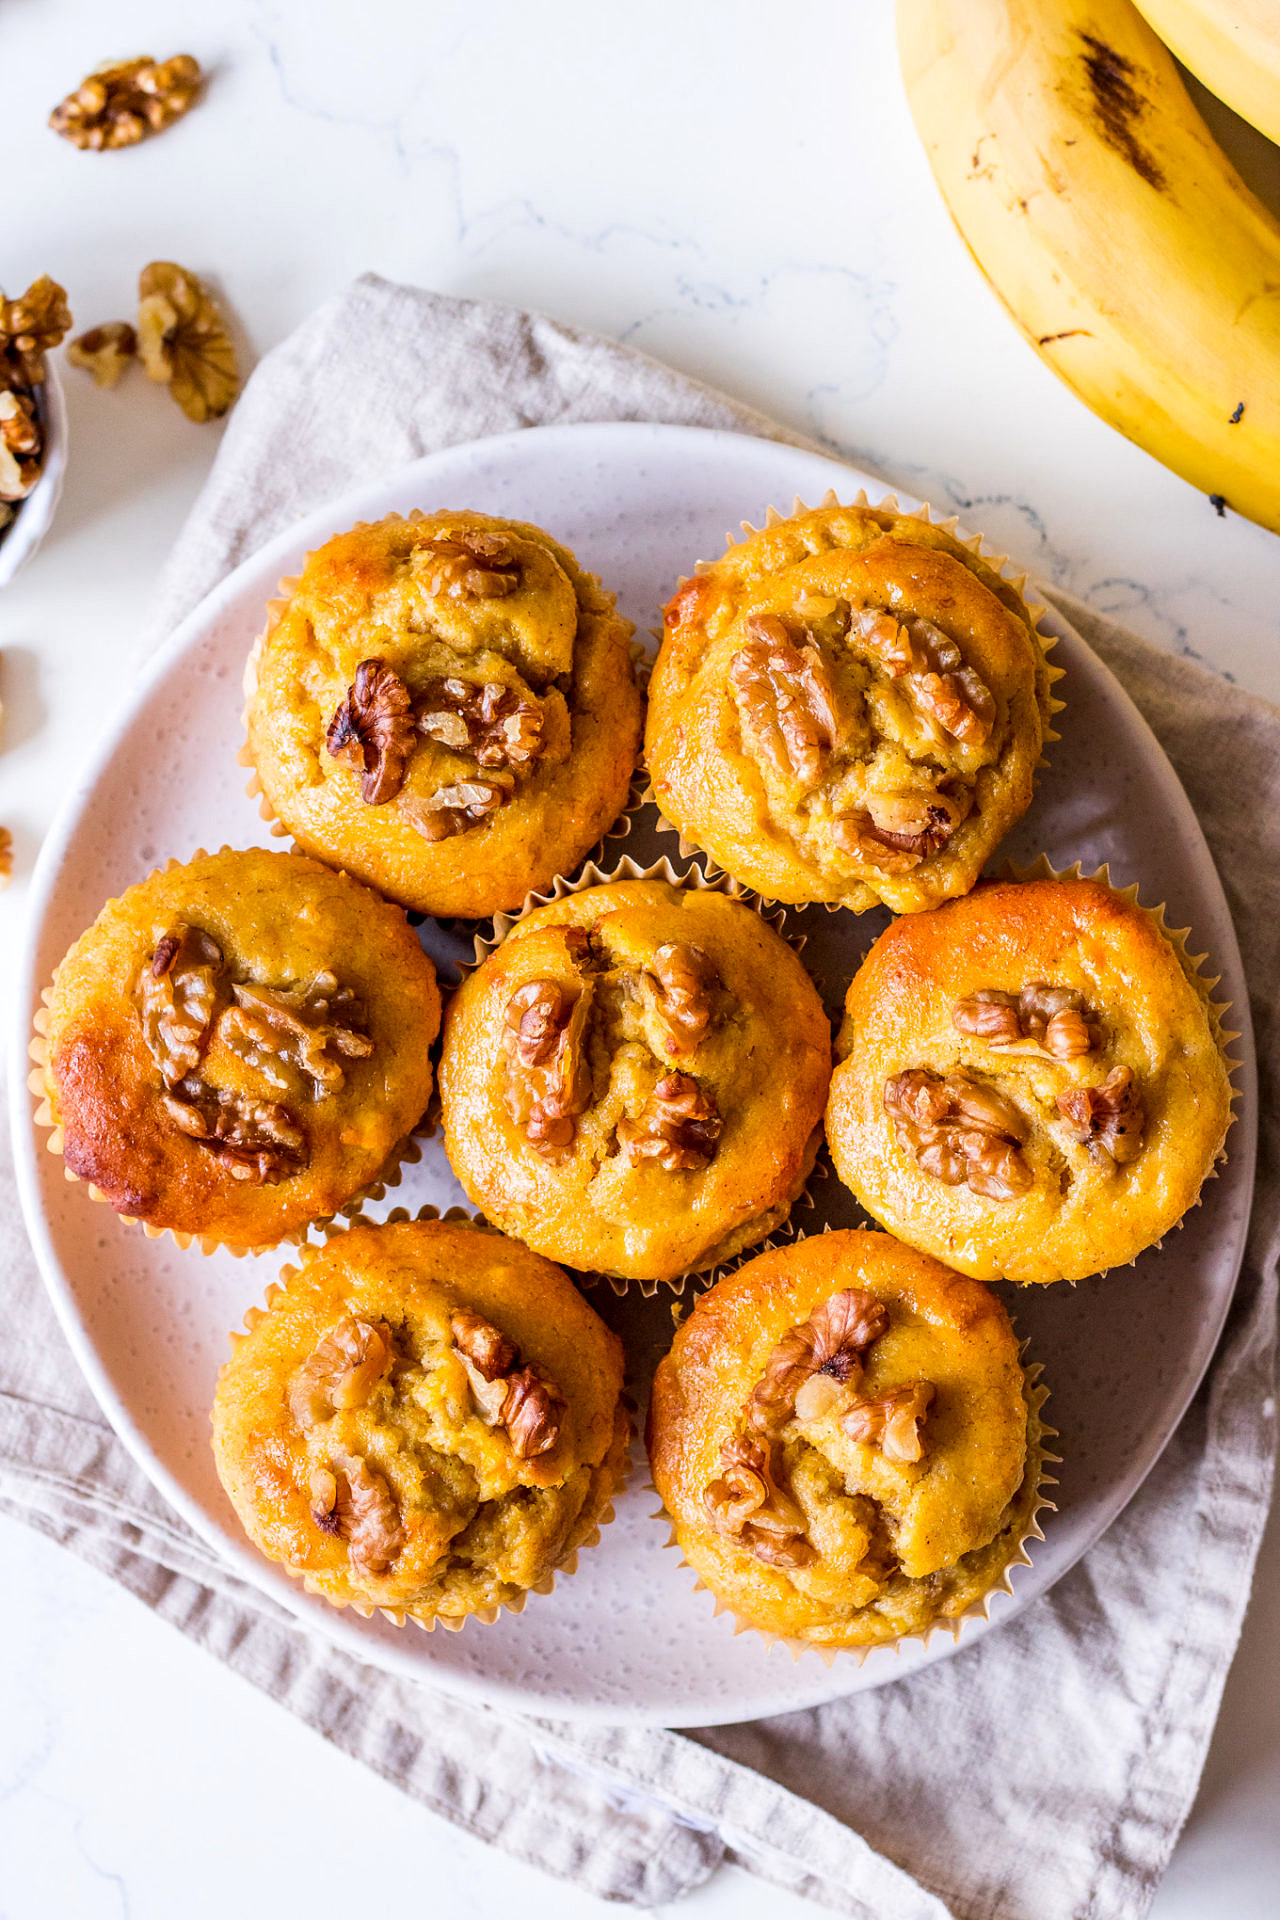 Small plate of pumpkin banana muffins topped with walnuts, arranged on a linen napkin